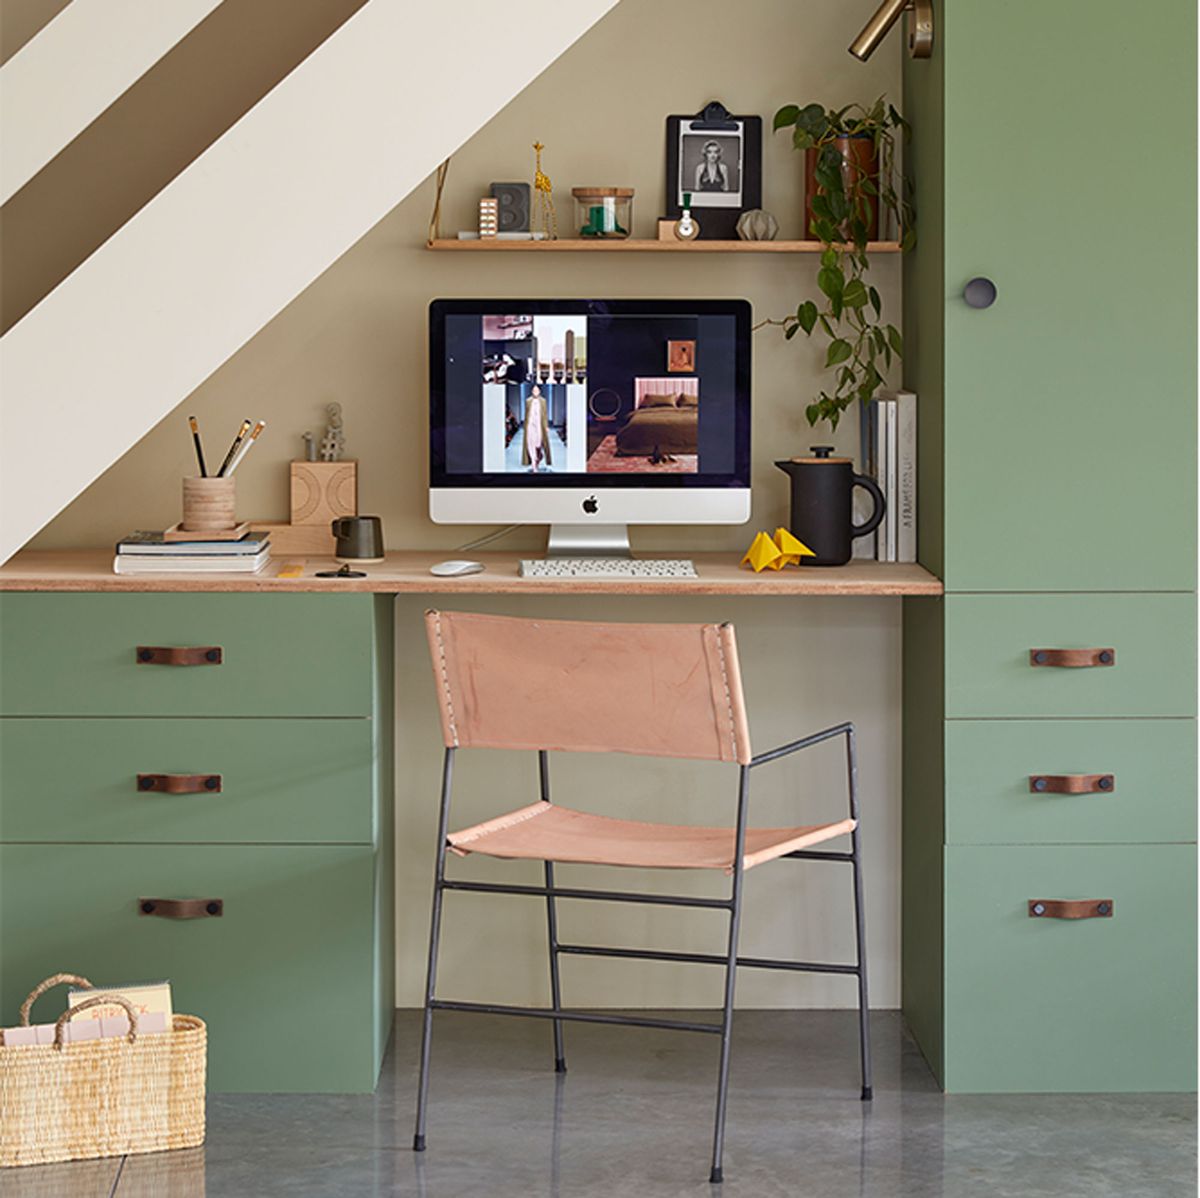 Home office desk ideas - 12 ways to kit out your work space with style |  Ideal Home